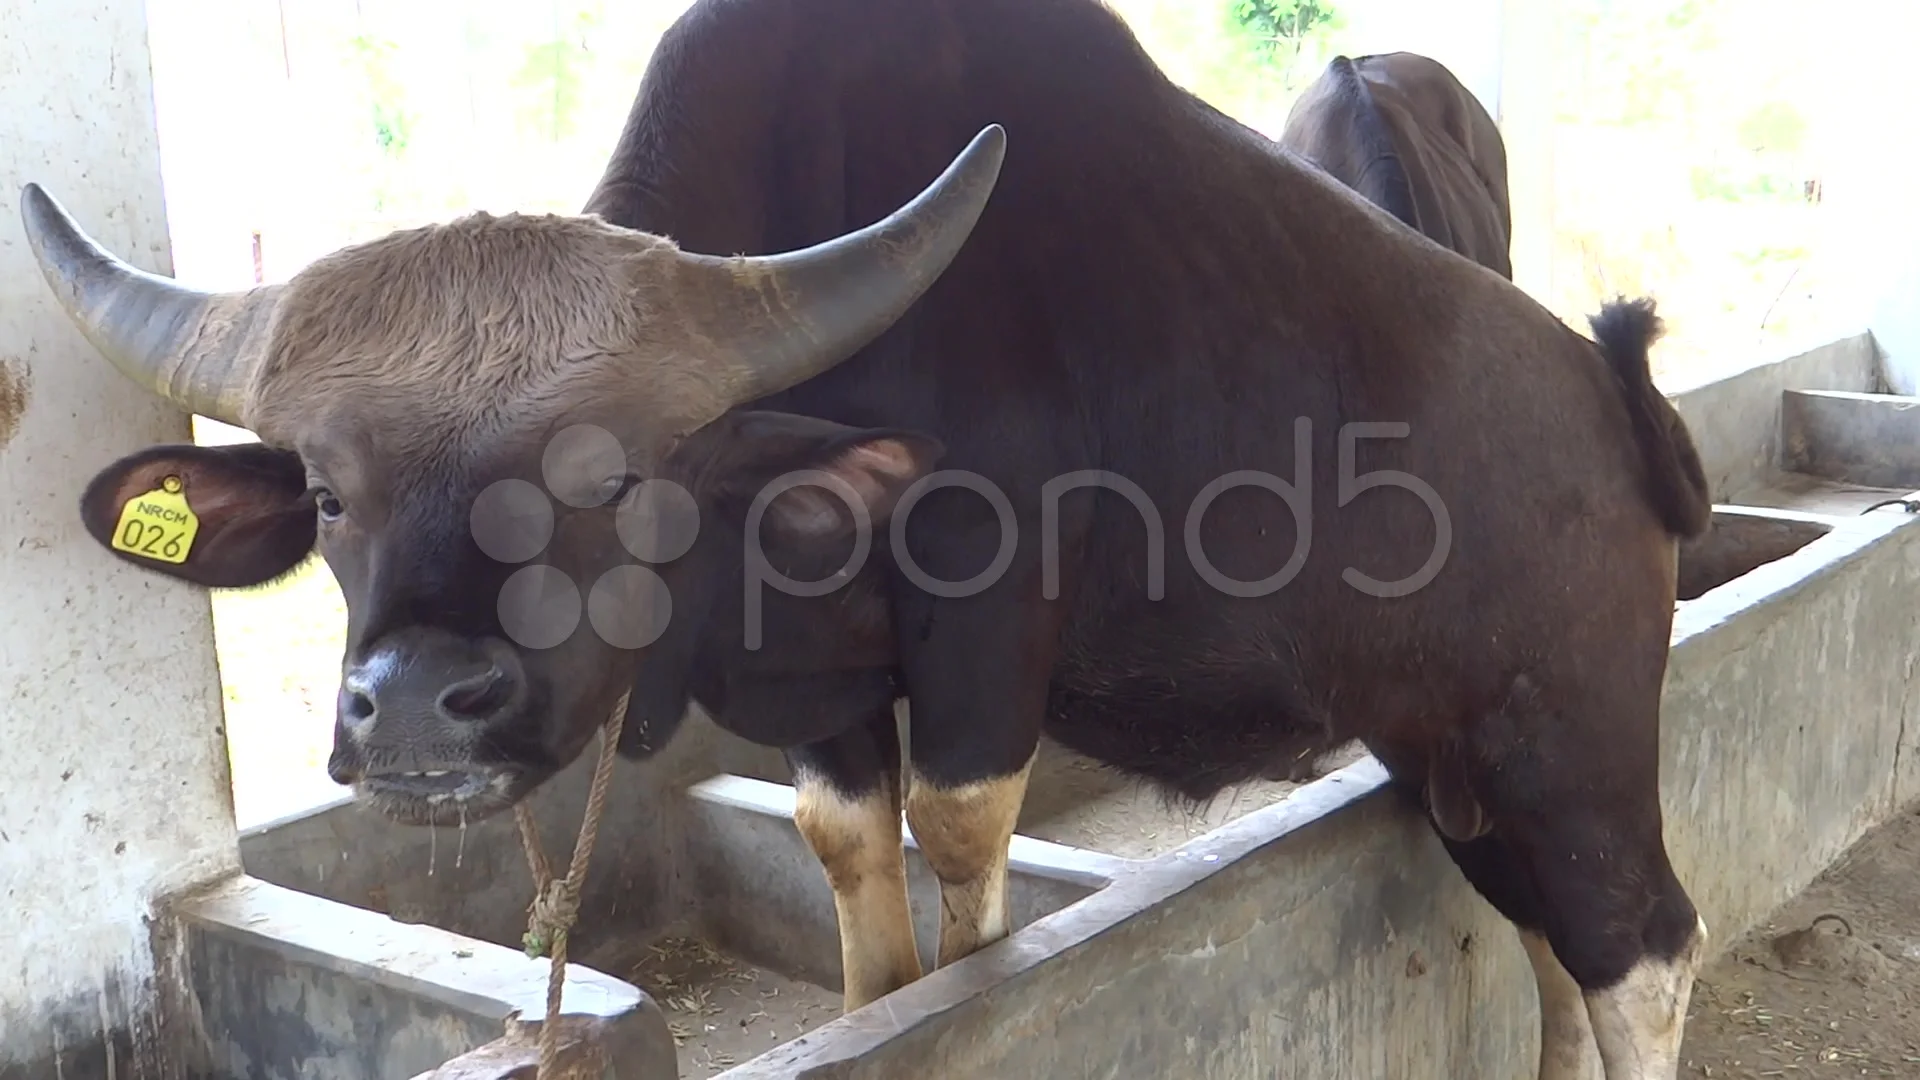 Mithun, reared as meat animal among the ... | Stock Video | Pond5